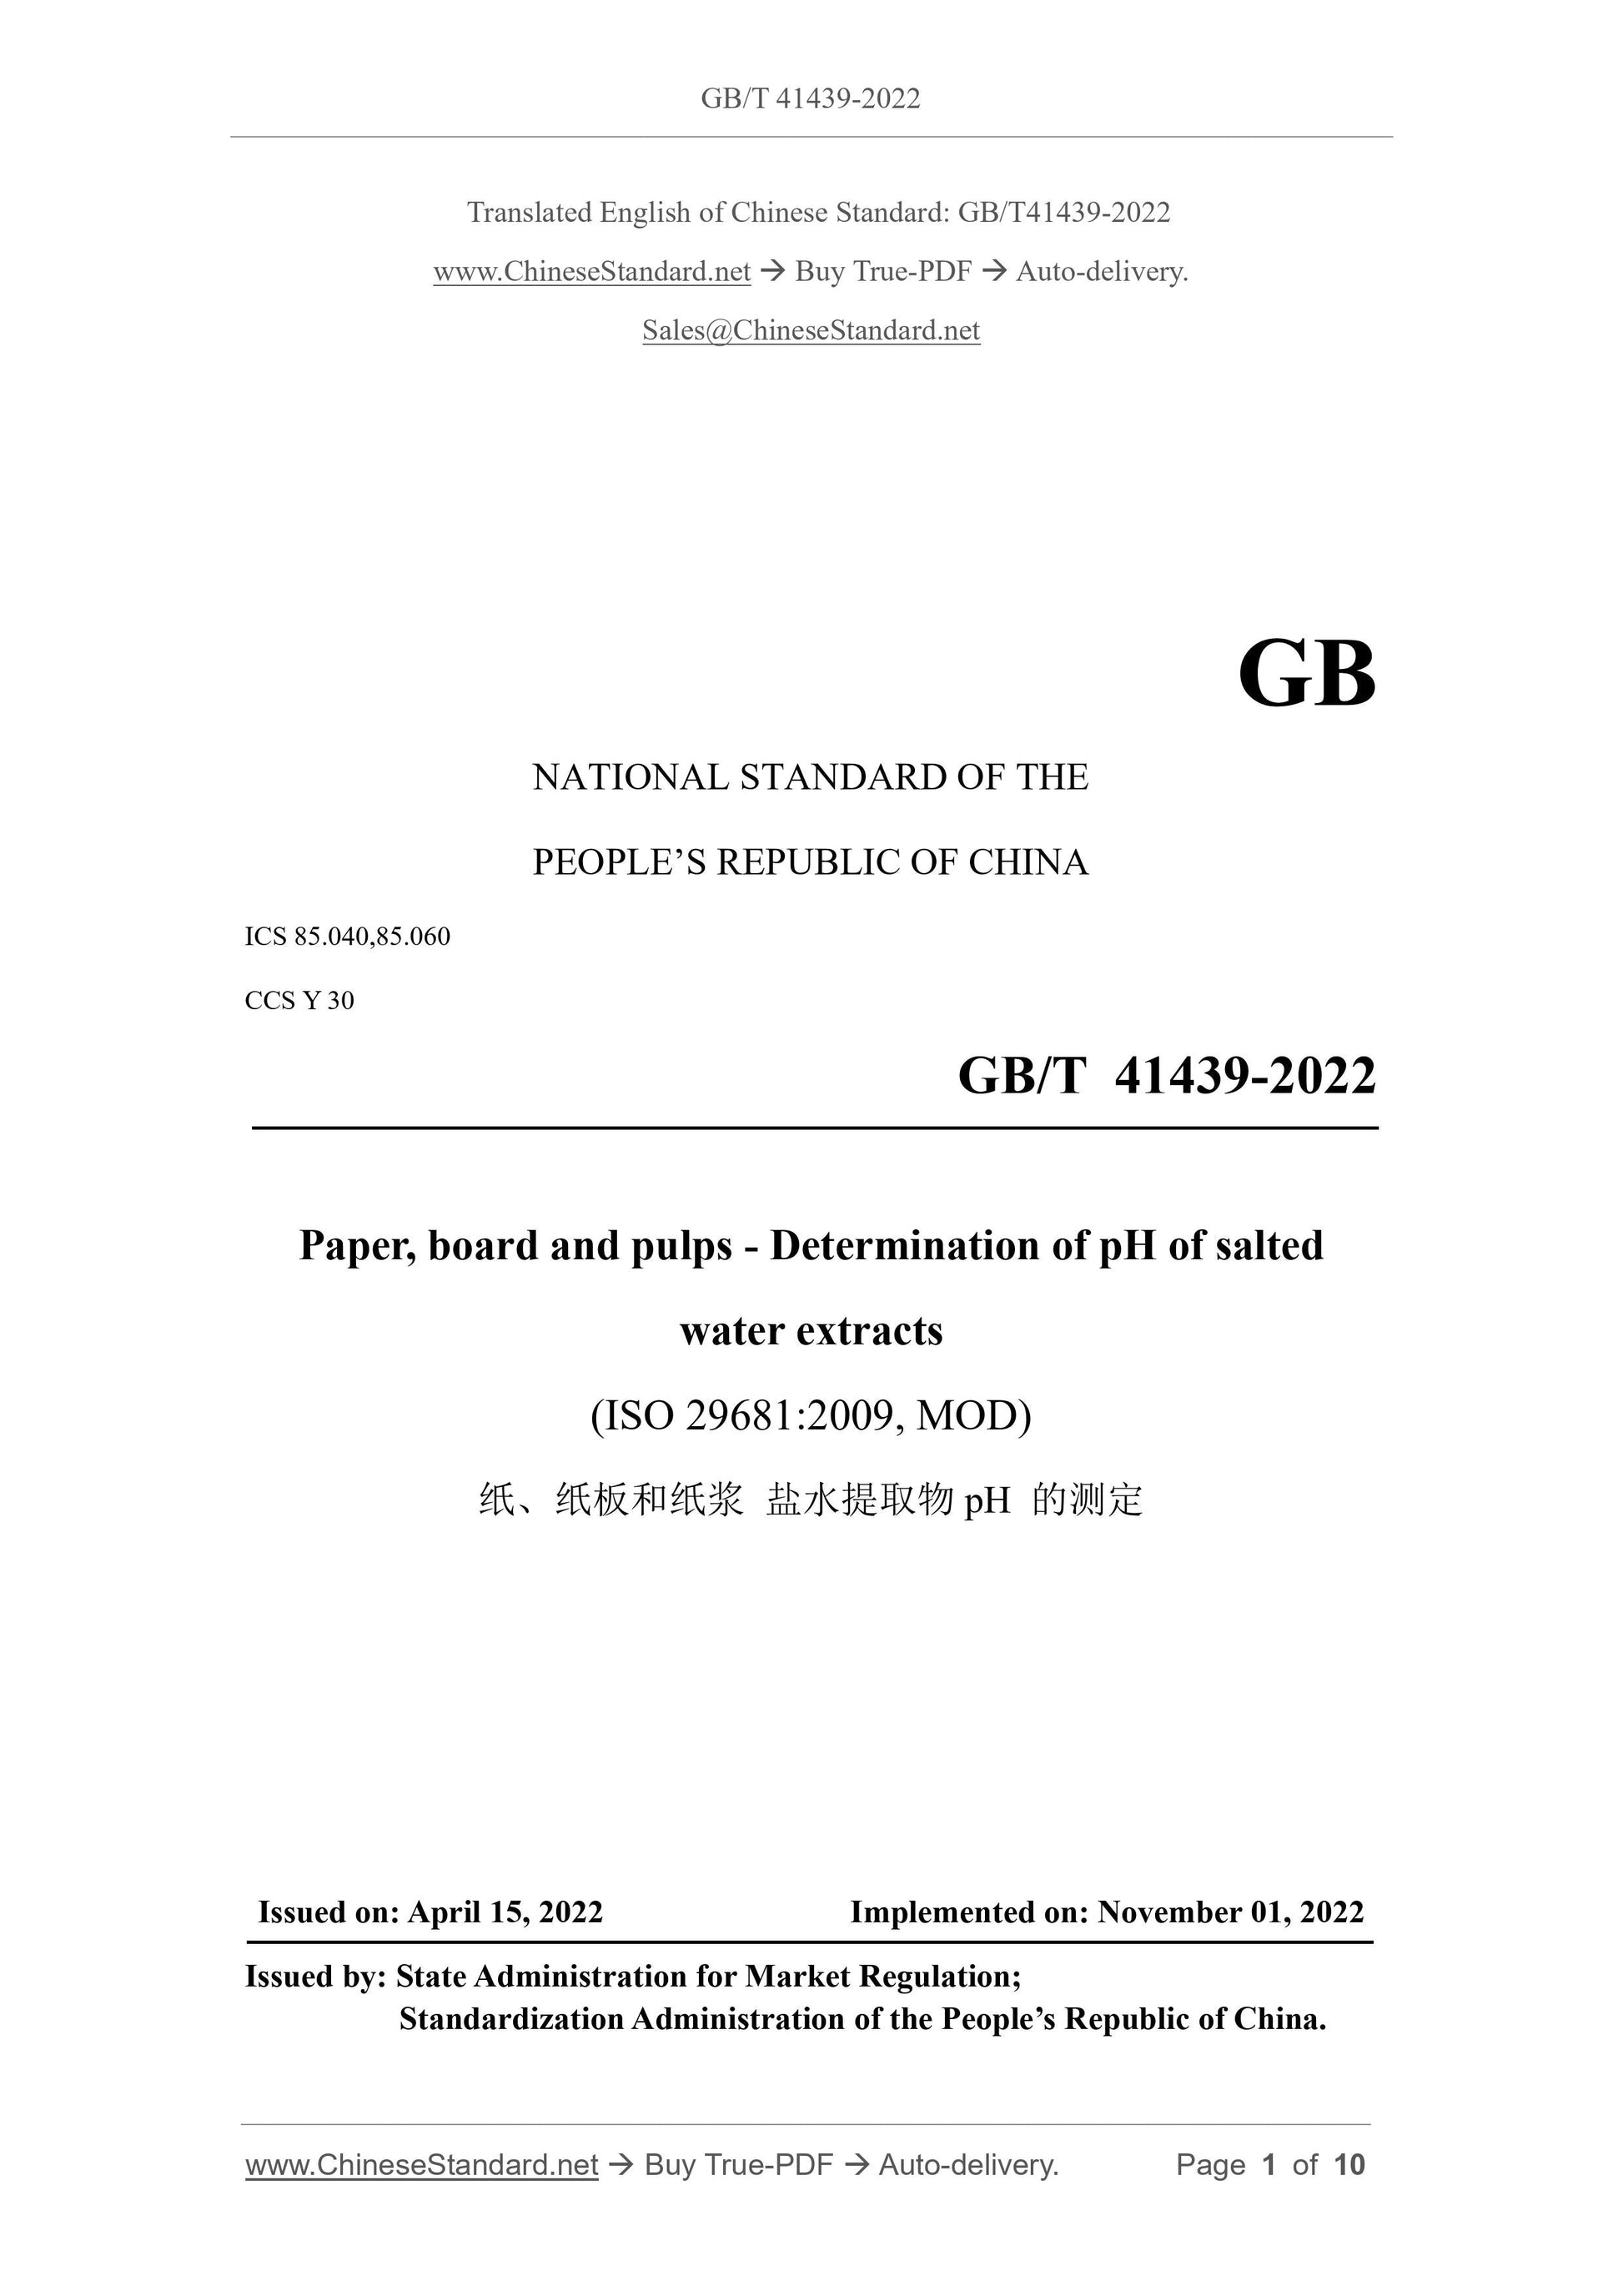 GB/T 41439-2022 Page 1